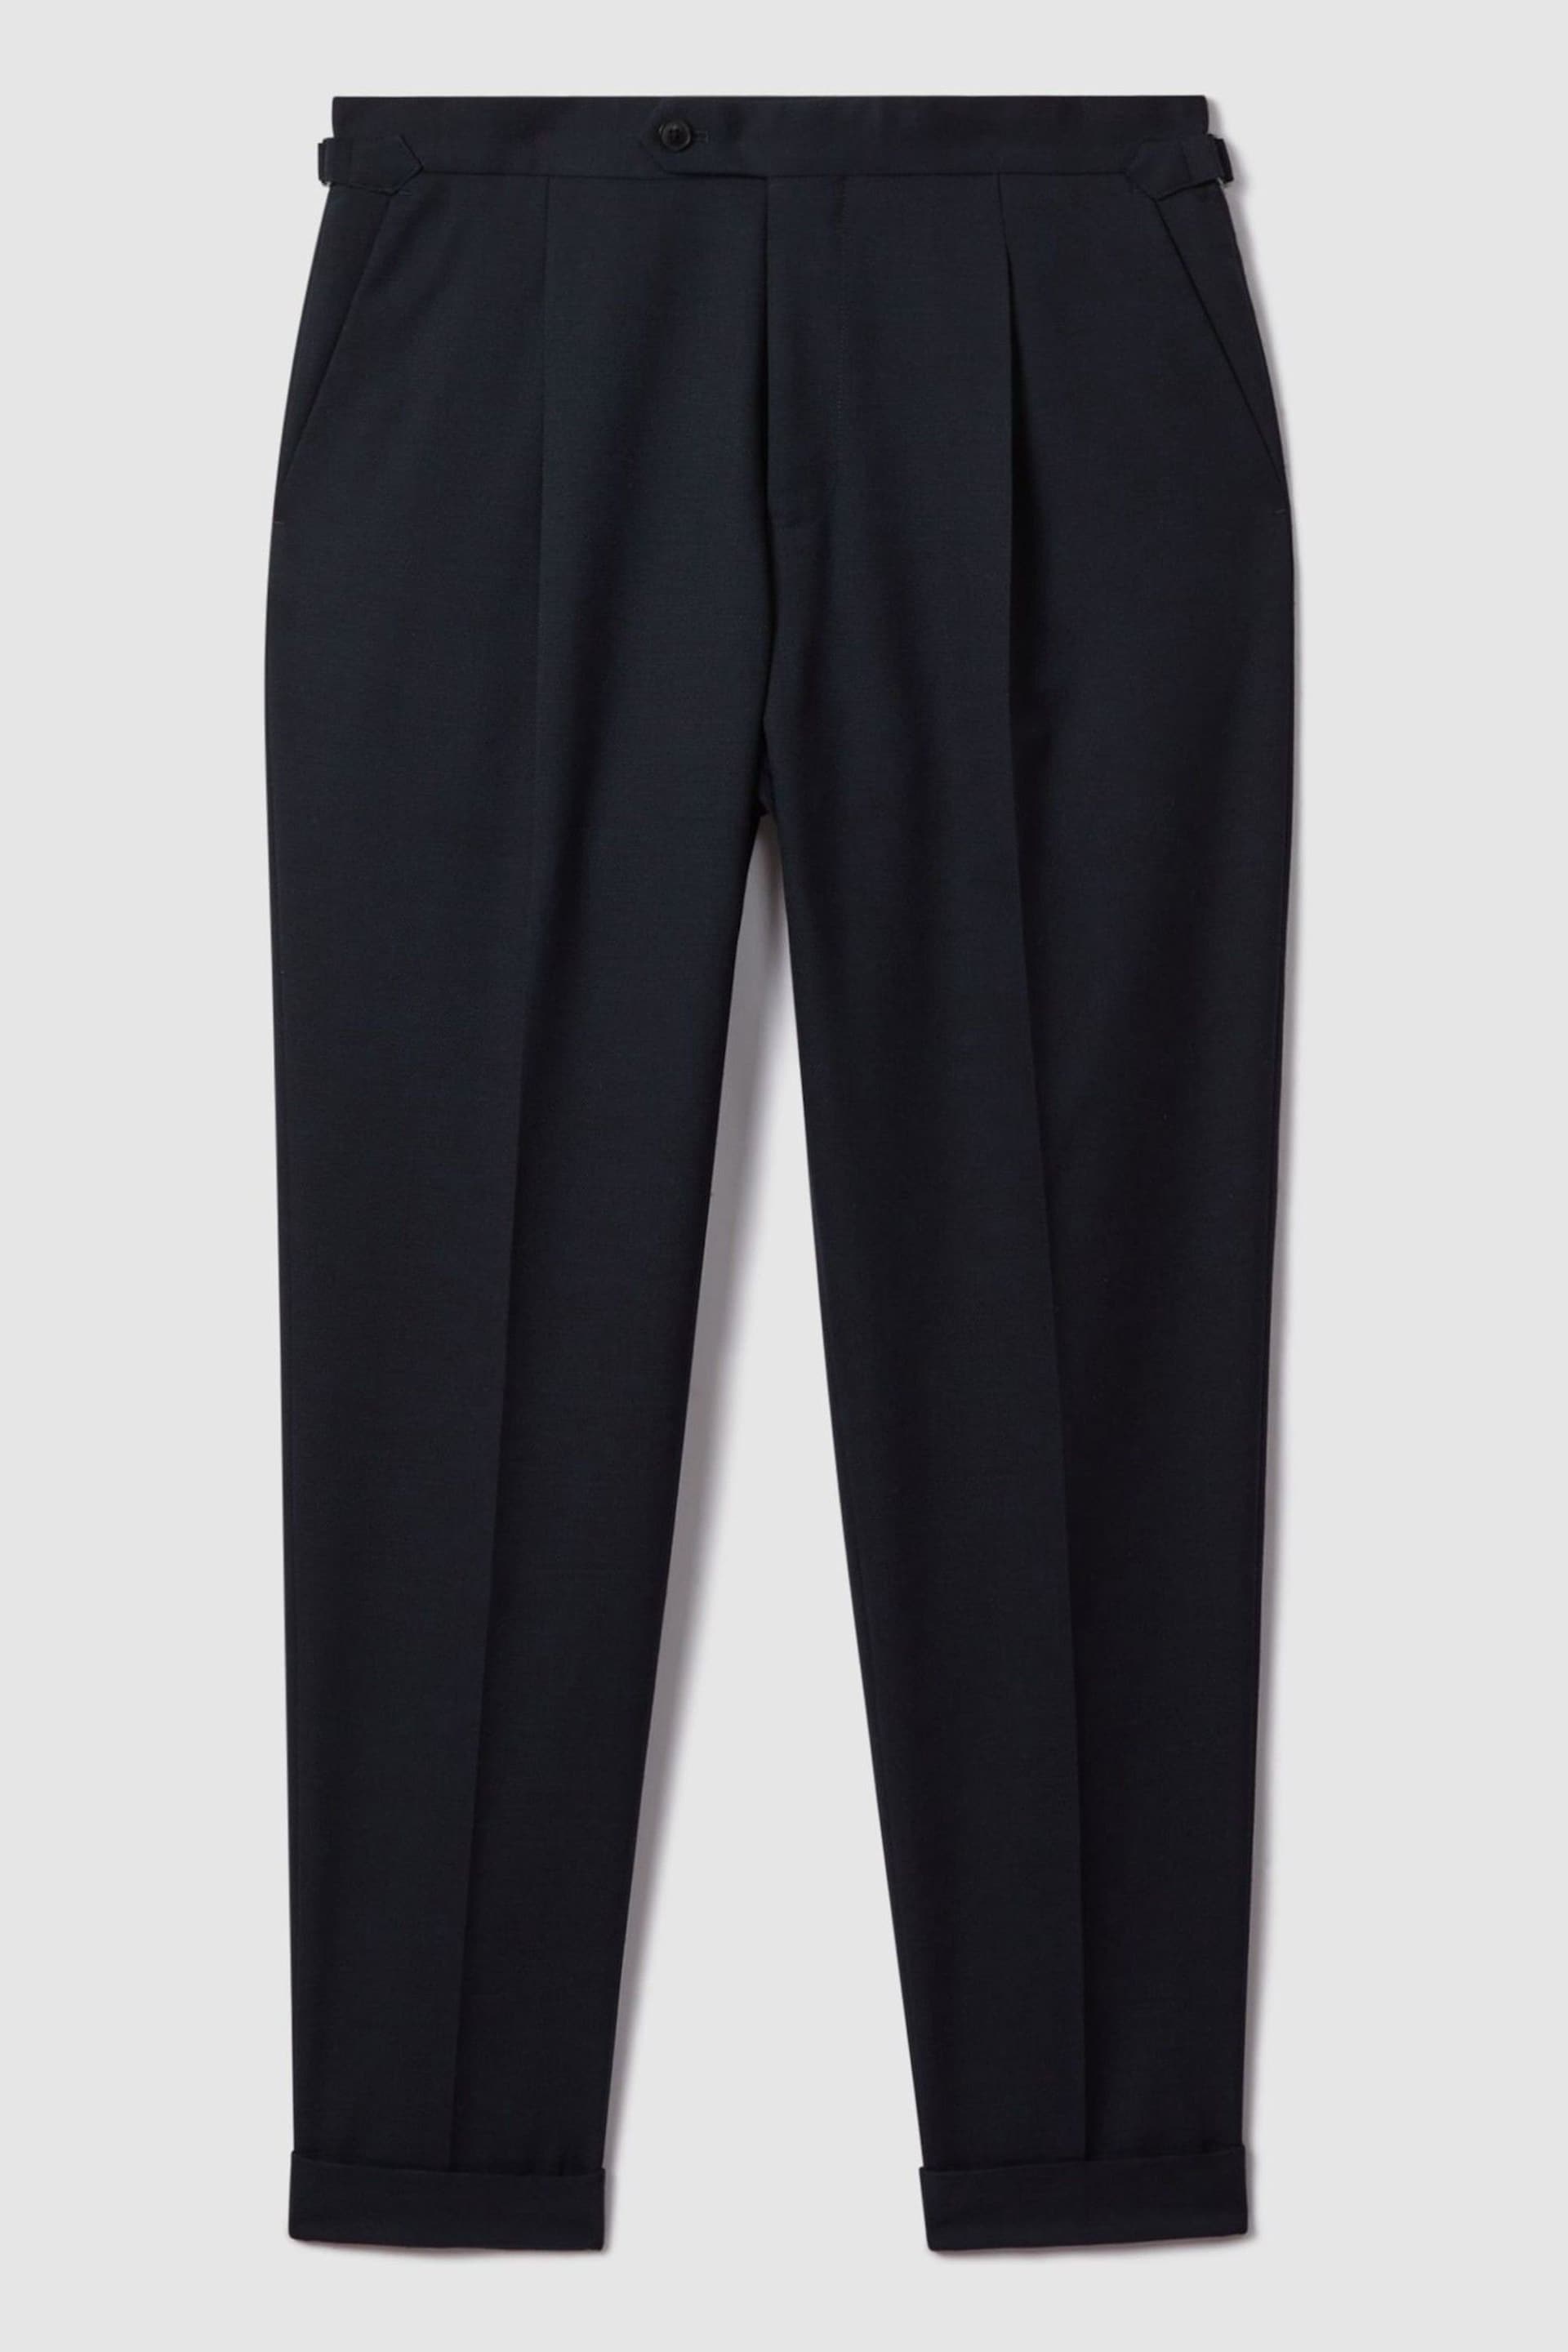 Reiss Navy Valentine Slim Fit Wool Blend Trousers with Turn-Ups - Image 2 of 5